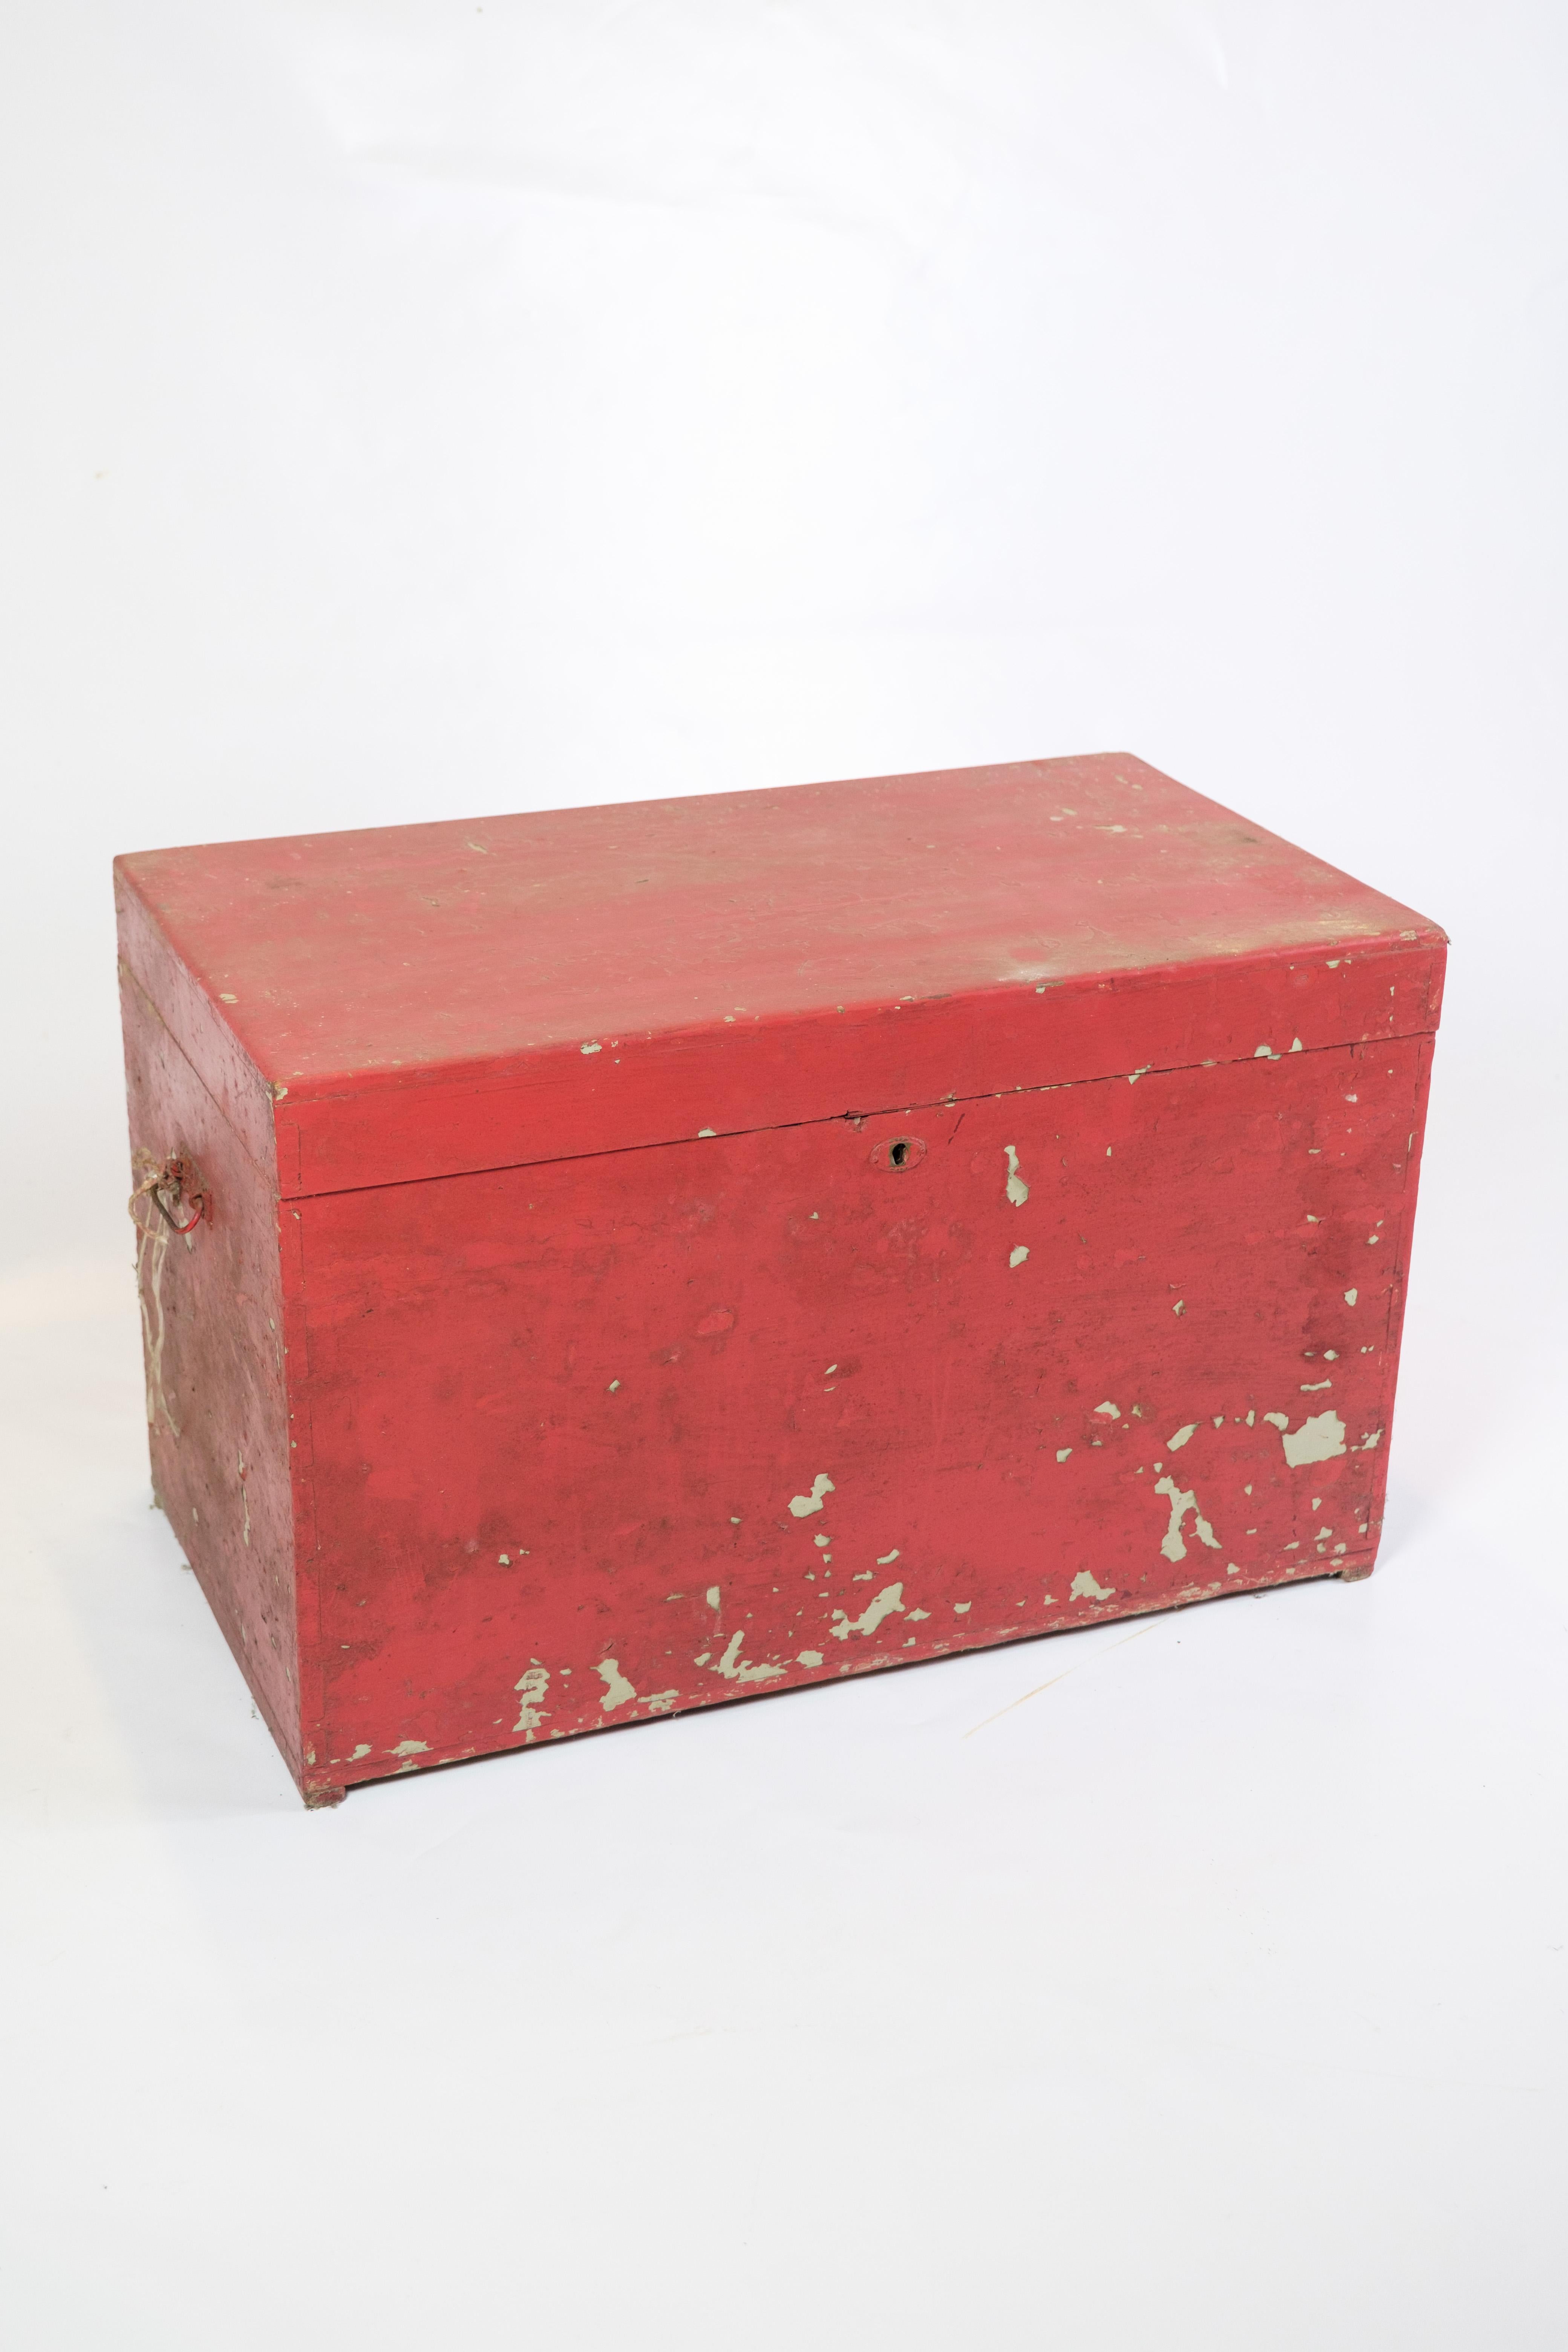 This antique red painted chest from 1830 exudes authenticity and charm. The patinated surface and artisanal construction testify to its historical value. With spacious storage and a rustic aesthetic, this chest is a beautiful addition to any room,